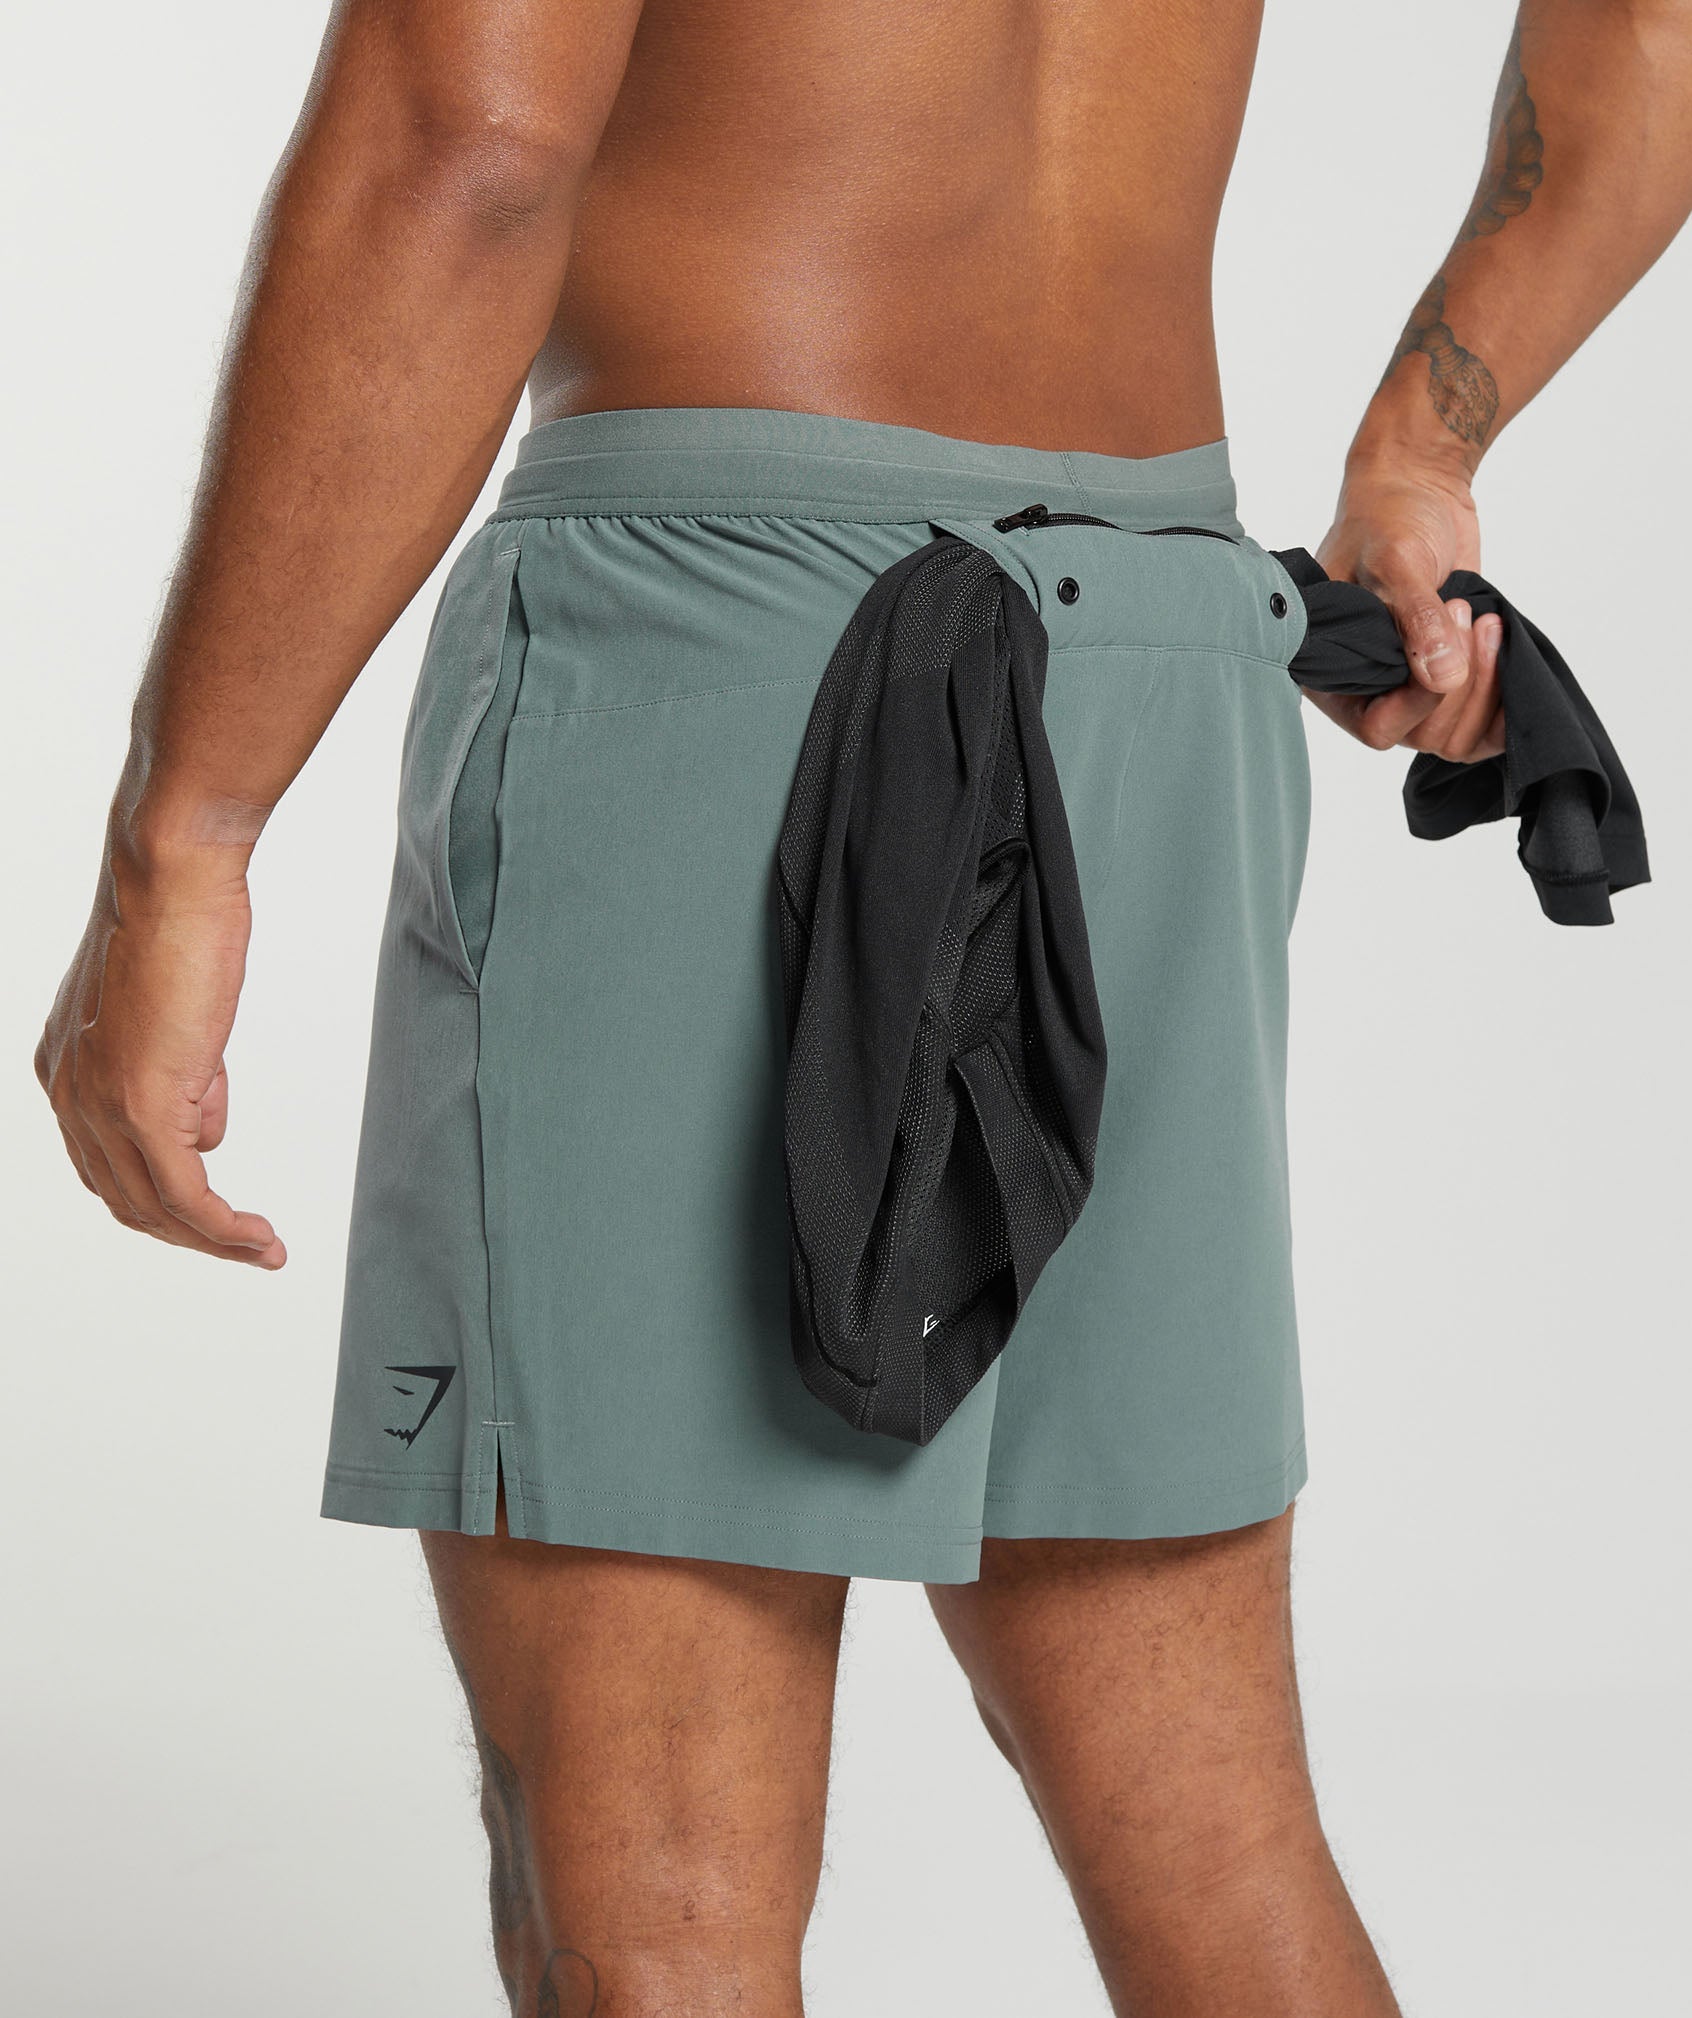 Land to Water 6" Shorts in Cargo Teal - view 8